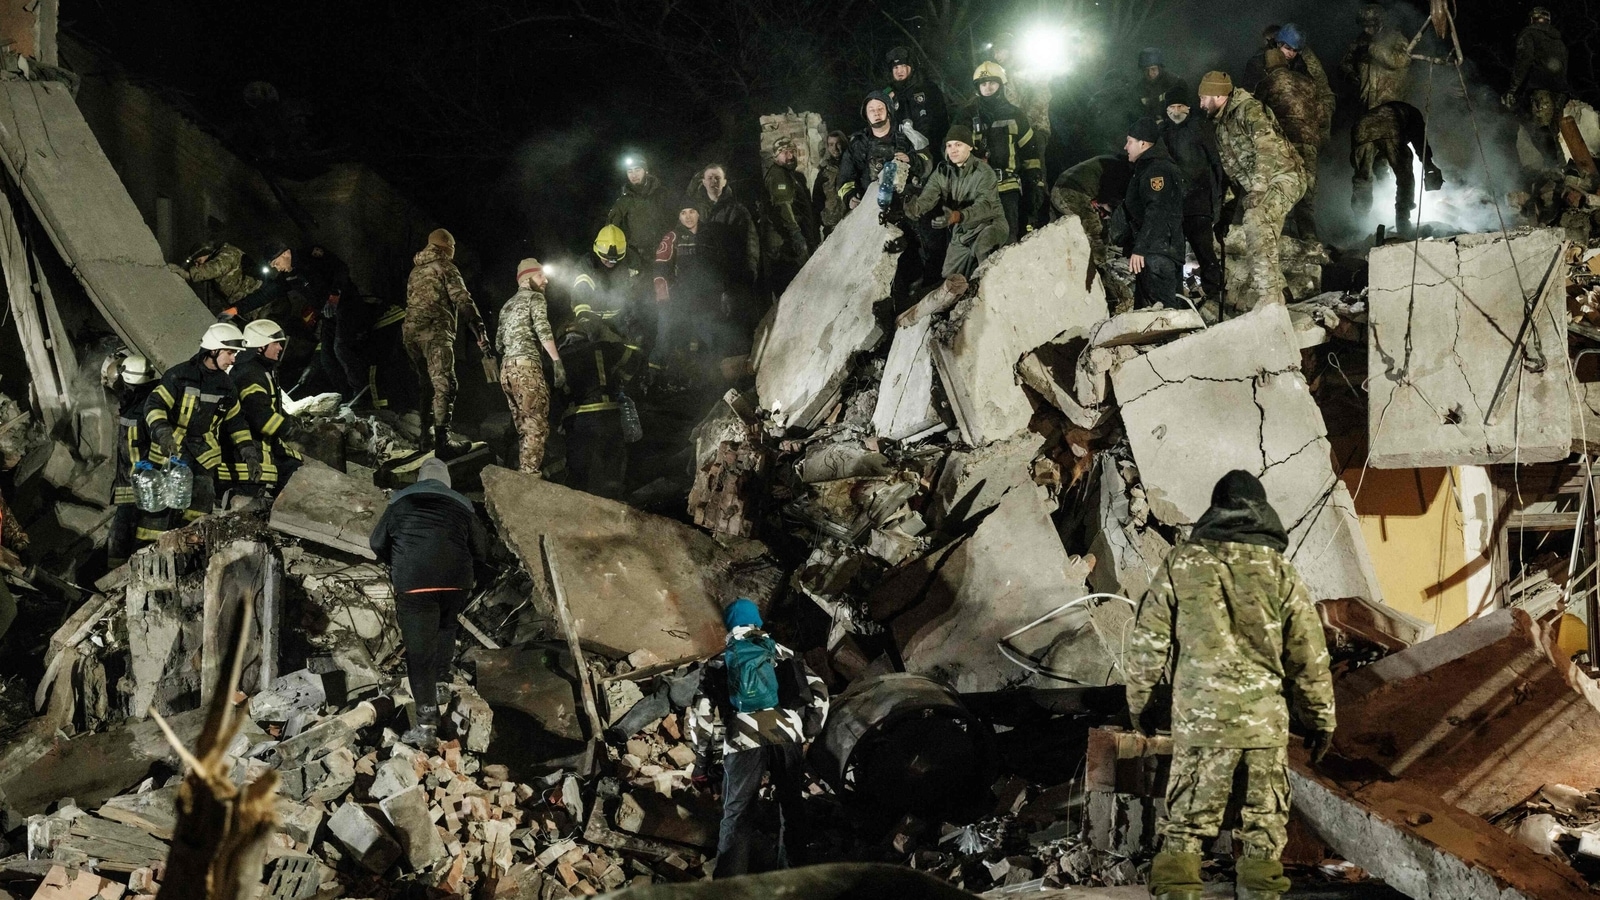 Explained: What's happening in Ukraine's east as Russia claims gains